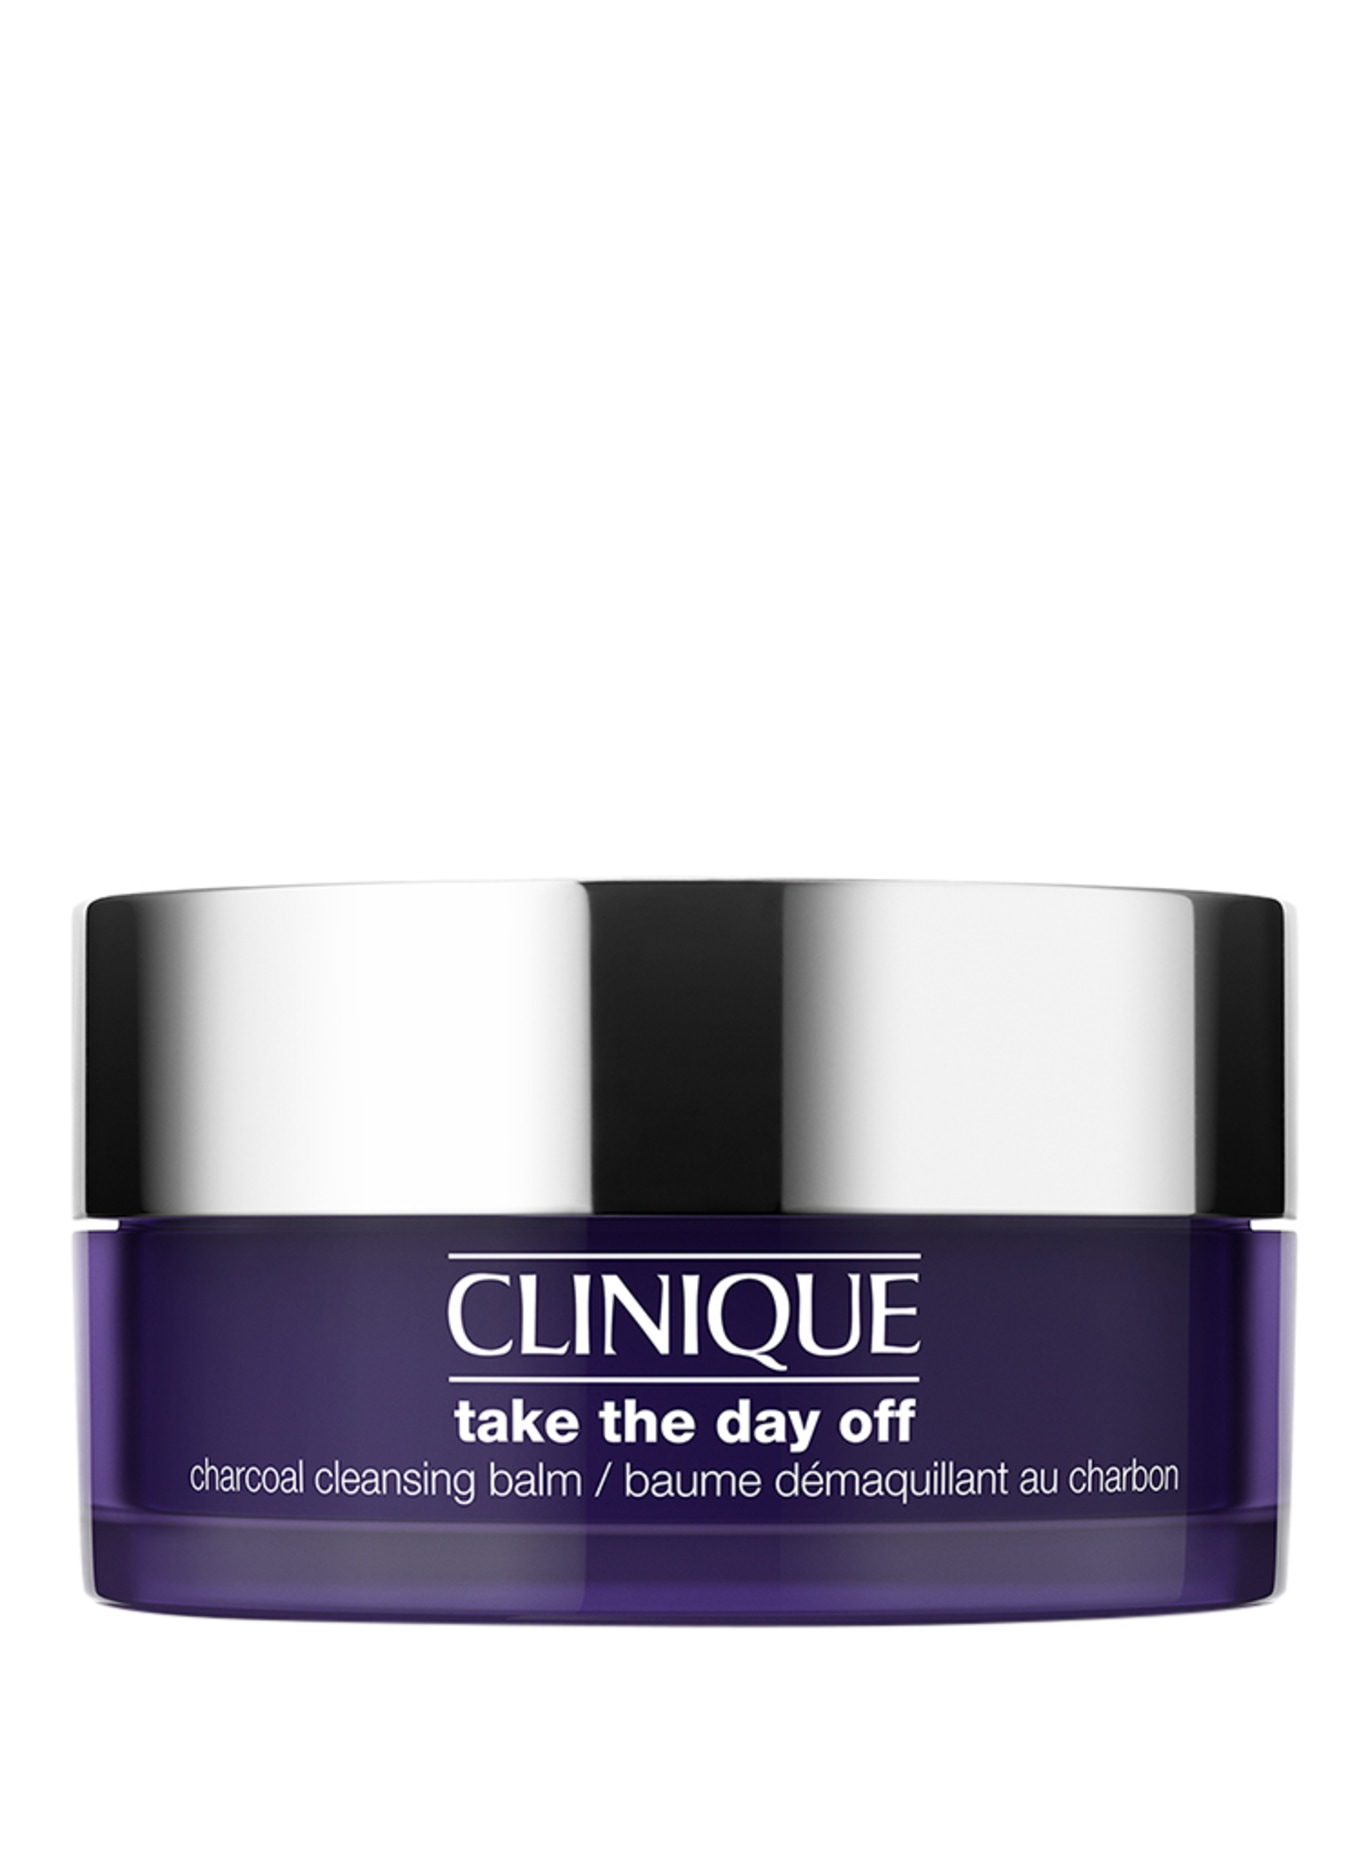 CLINIQUE TAKE THE DAY OFF CHARCOAL CLEANSING BALM (Obrazek 1)